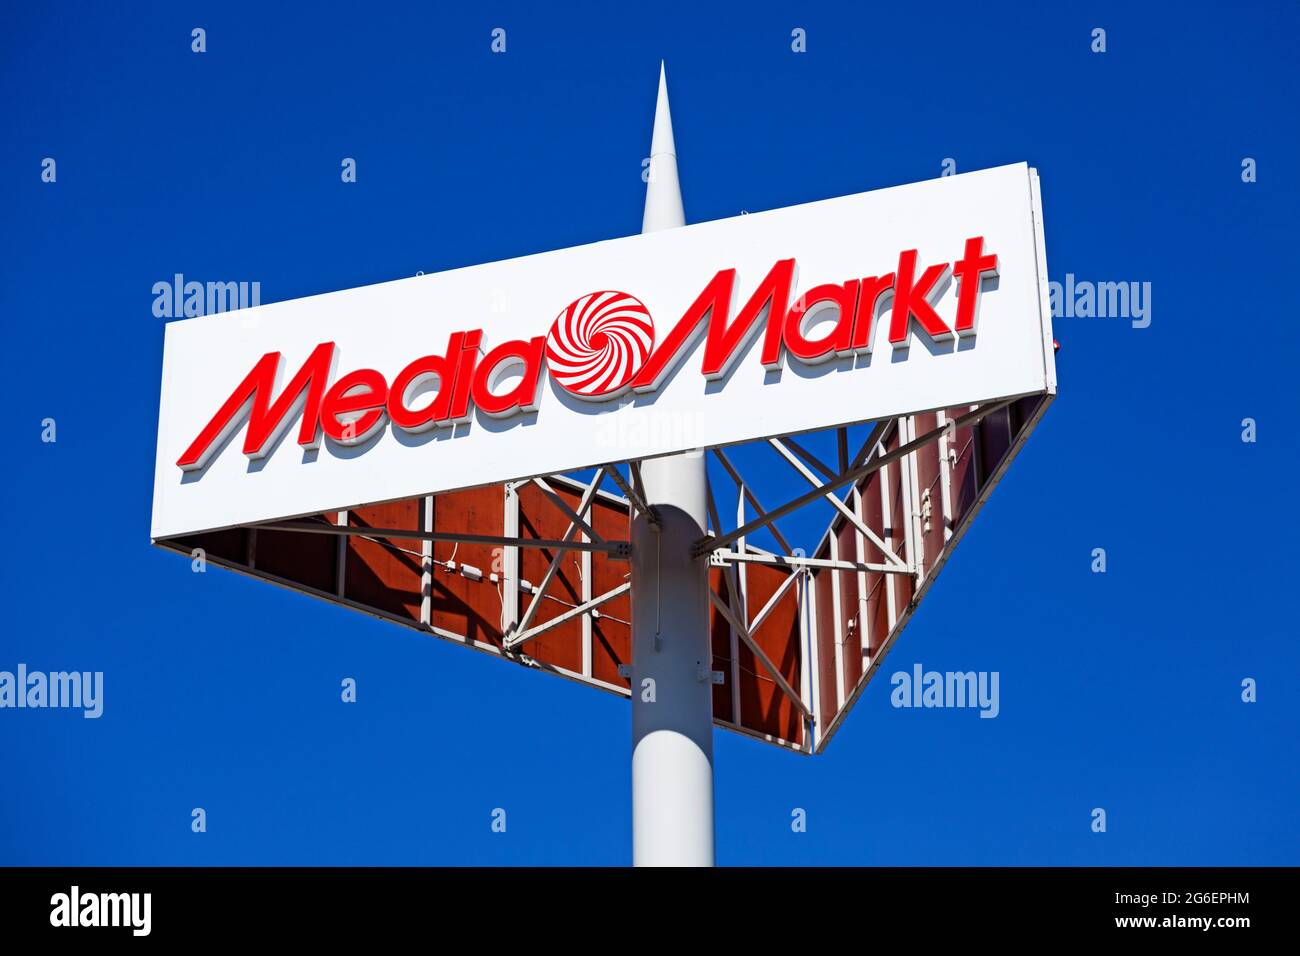 Umea, Norrland Sweden - June 7, 2021: sign for famous electronics store Stock Photo